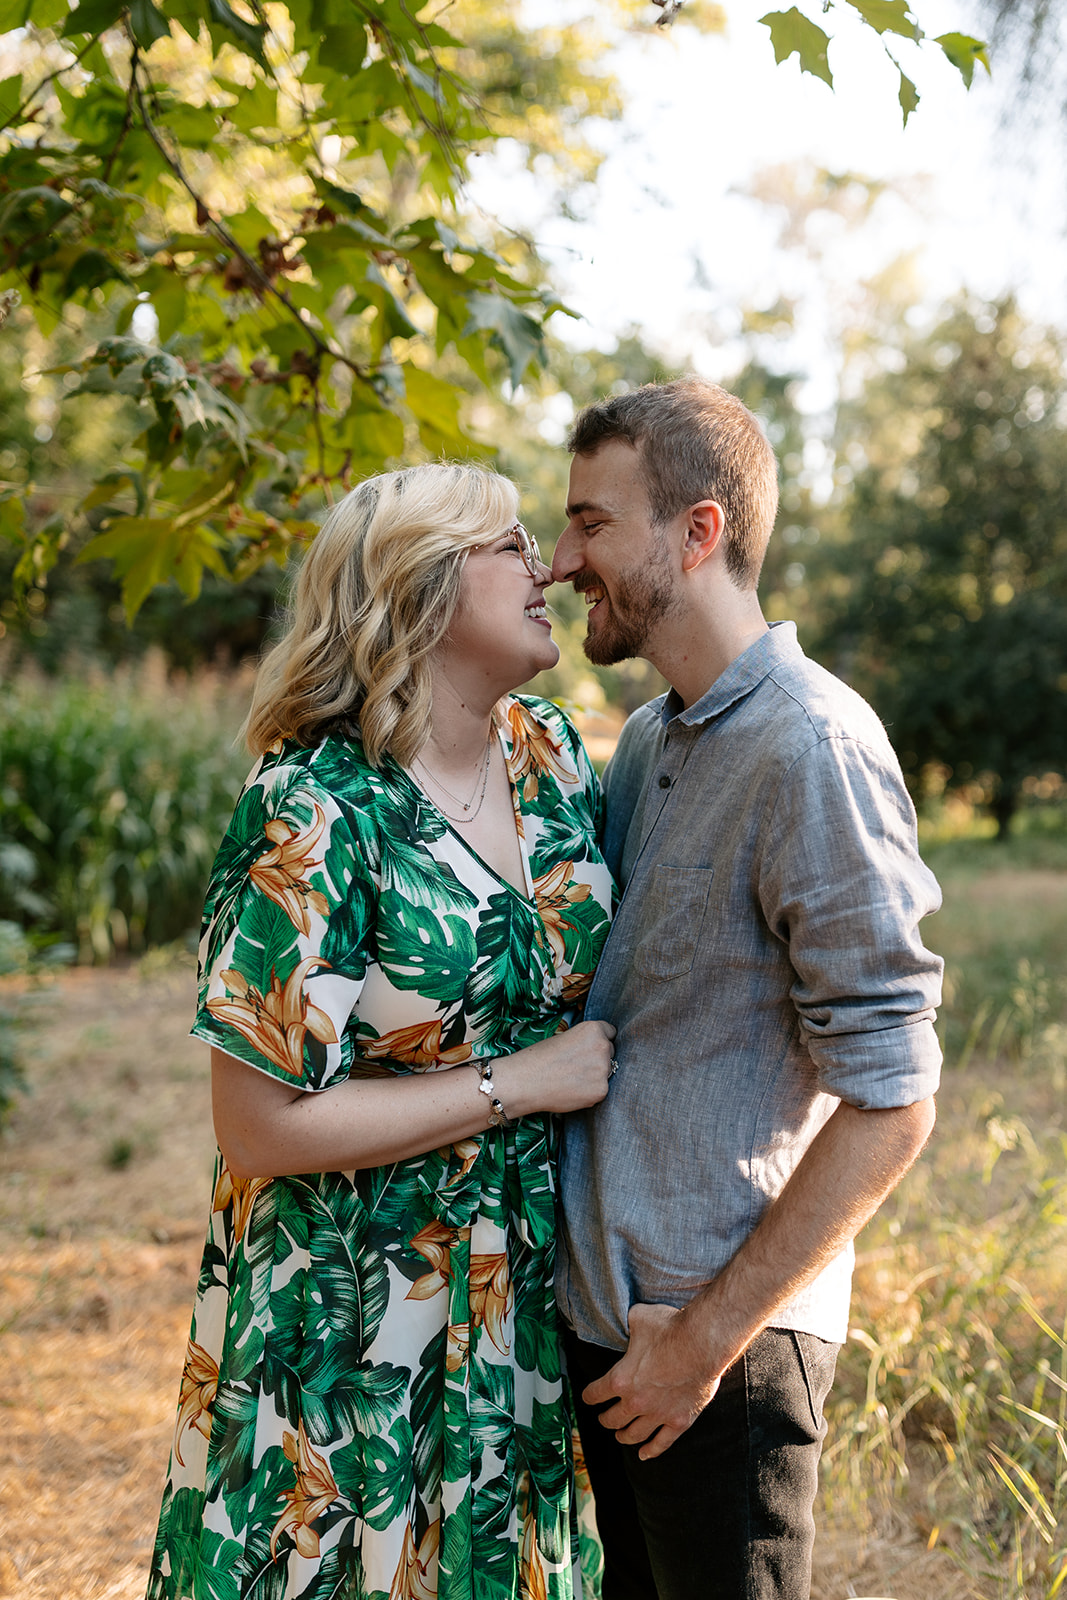 hiltscher park fullerton california engagement session sunny photoshoot southern california engagement photographer ring